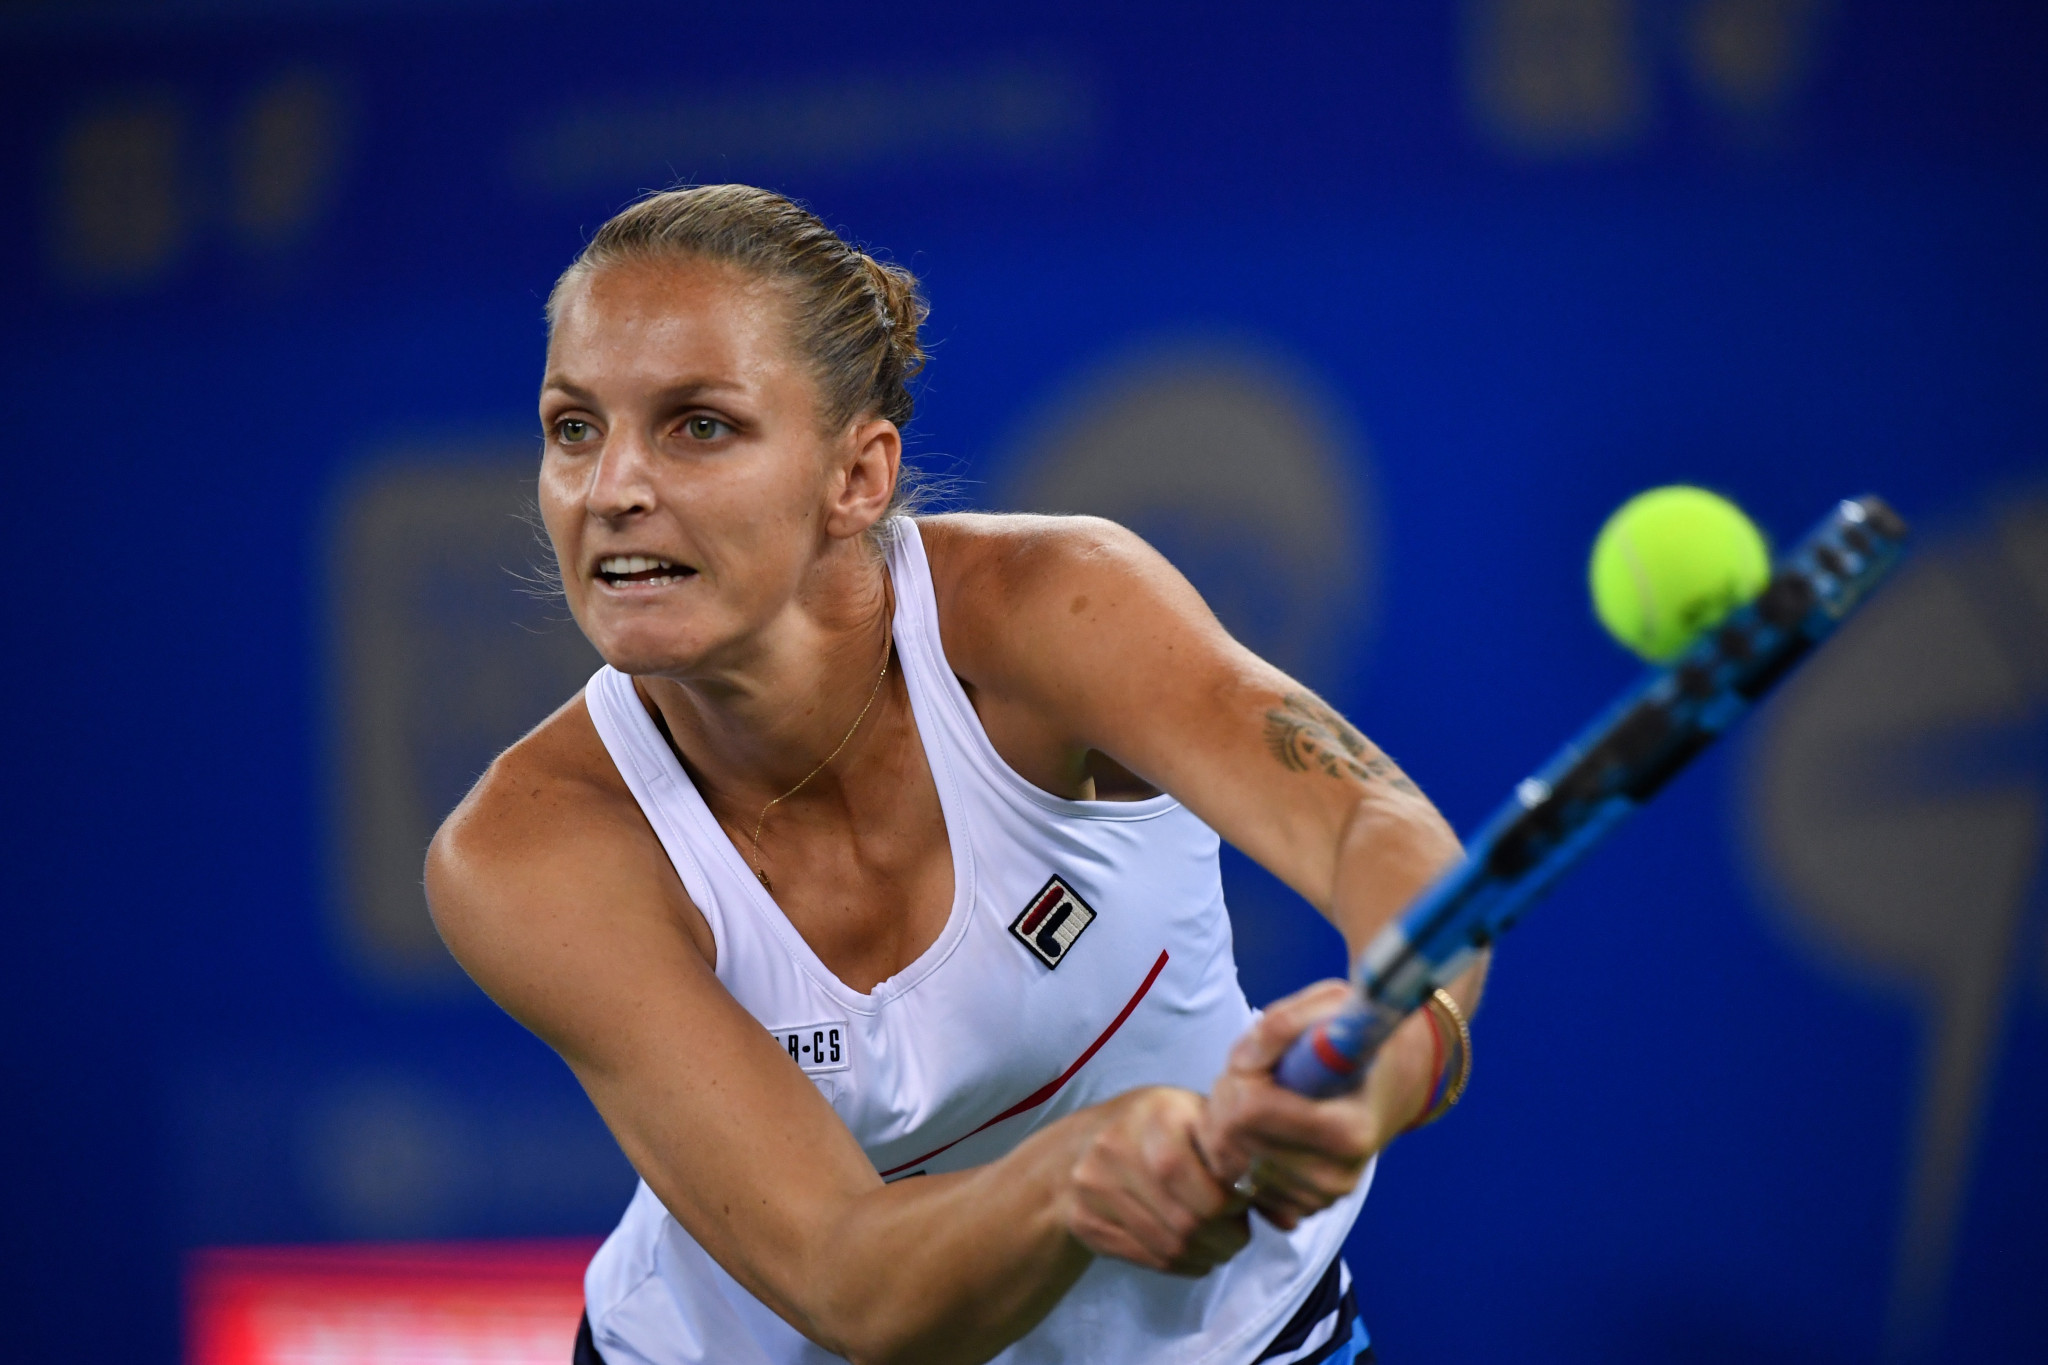 The Czech Republic's Karolína Plíšková suffered a straight sets defeat against Ukraine's Ukraine’s Dayana Yastremska and missed the opportunity to claim the world number one position ©Getty Images